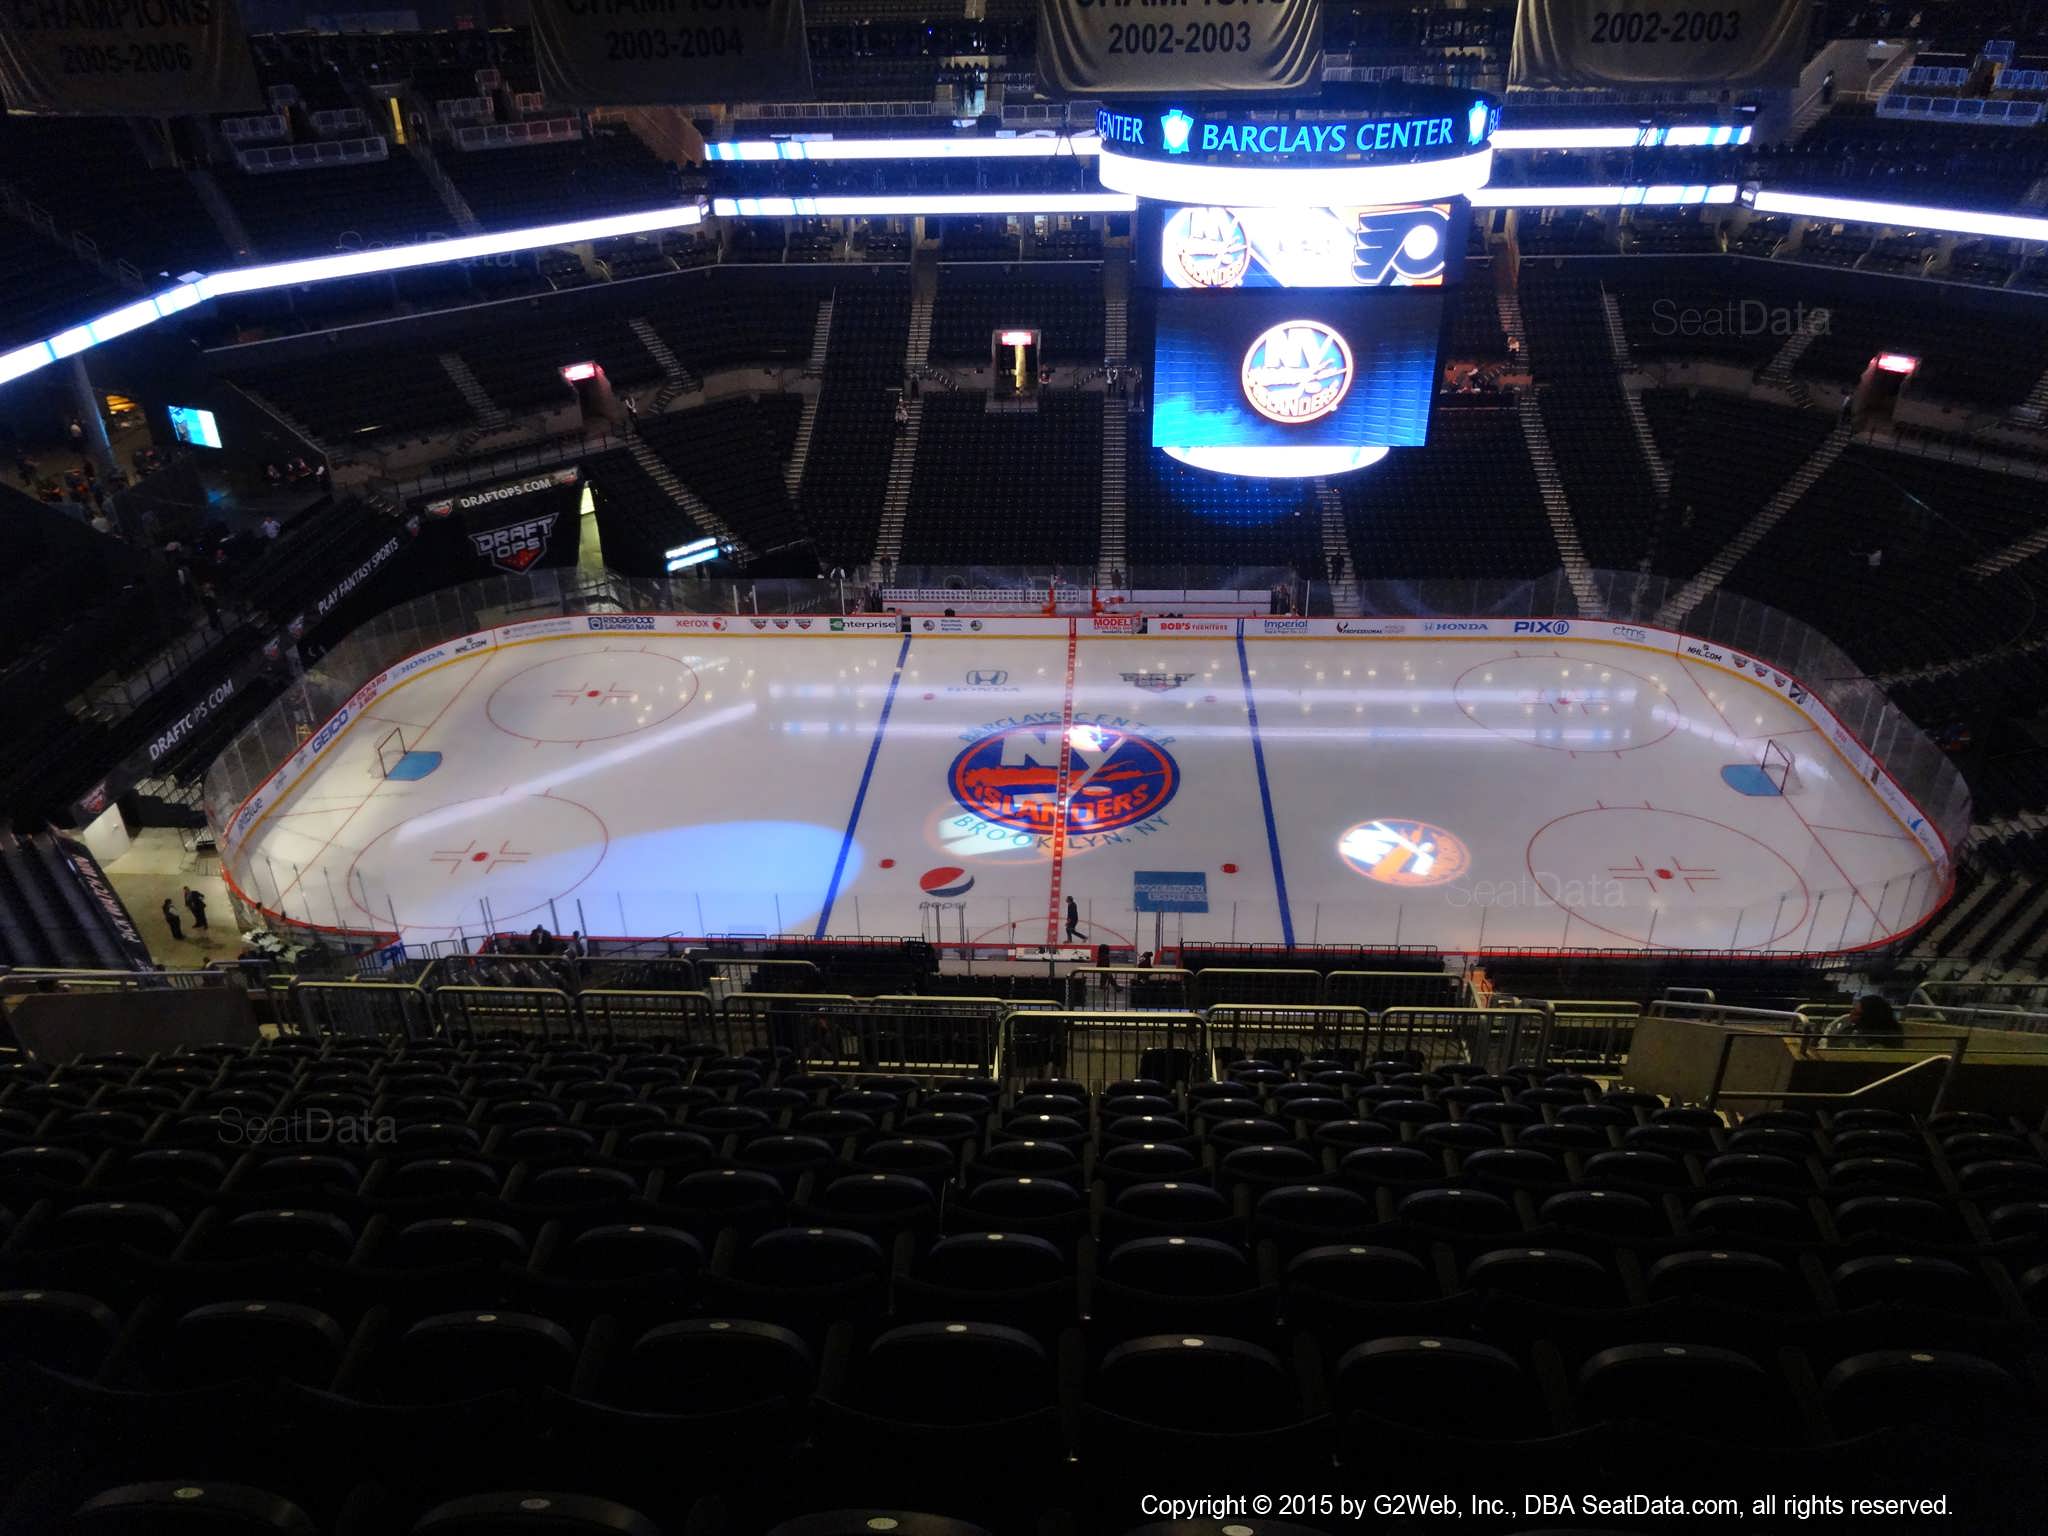 Seat View from Section 225 at the Barclays Center, home of the New York Islanders